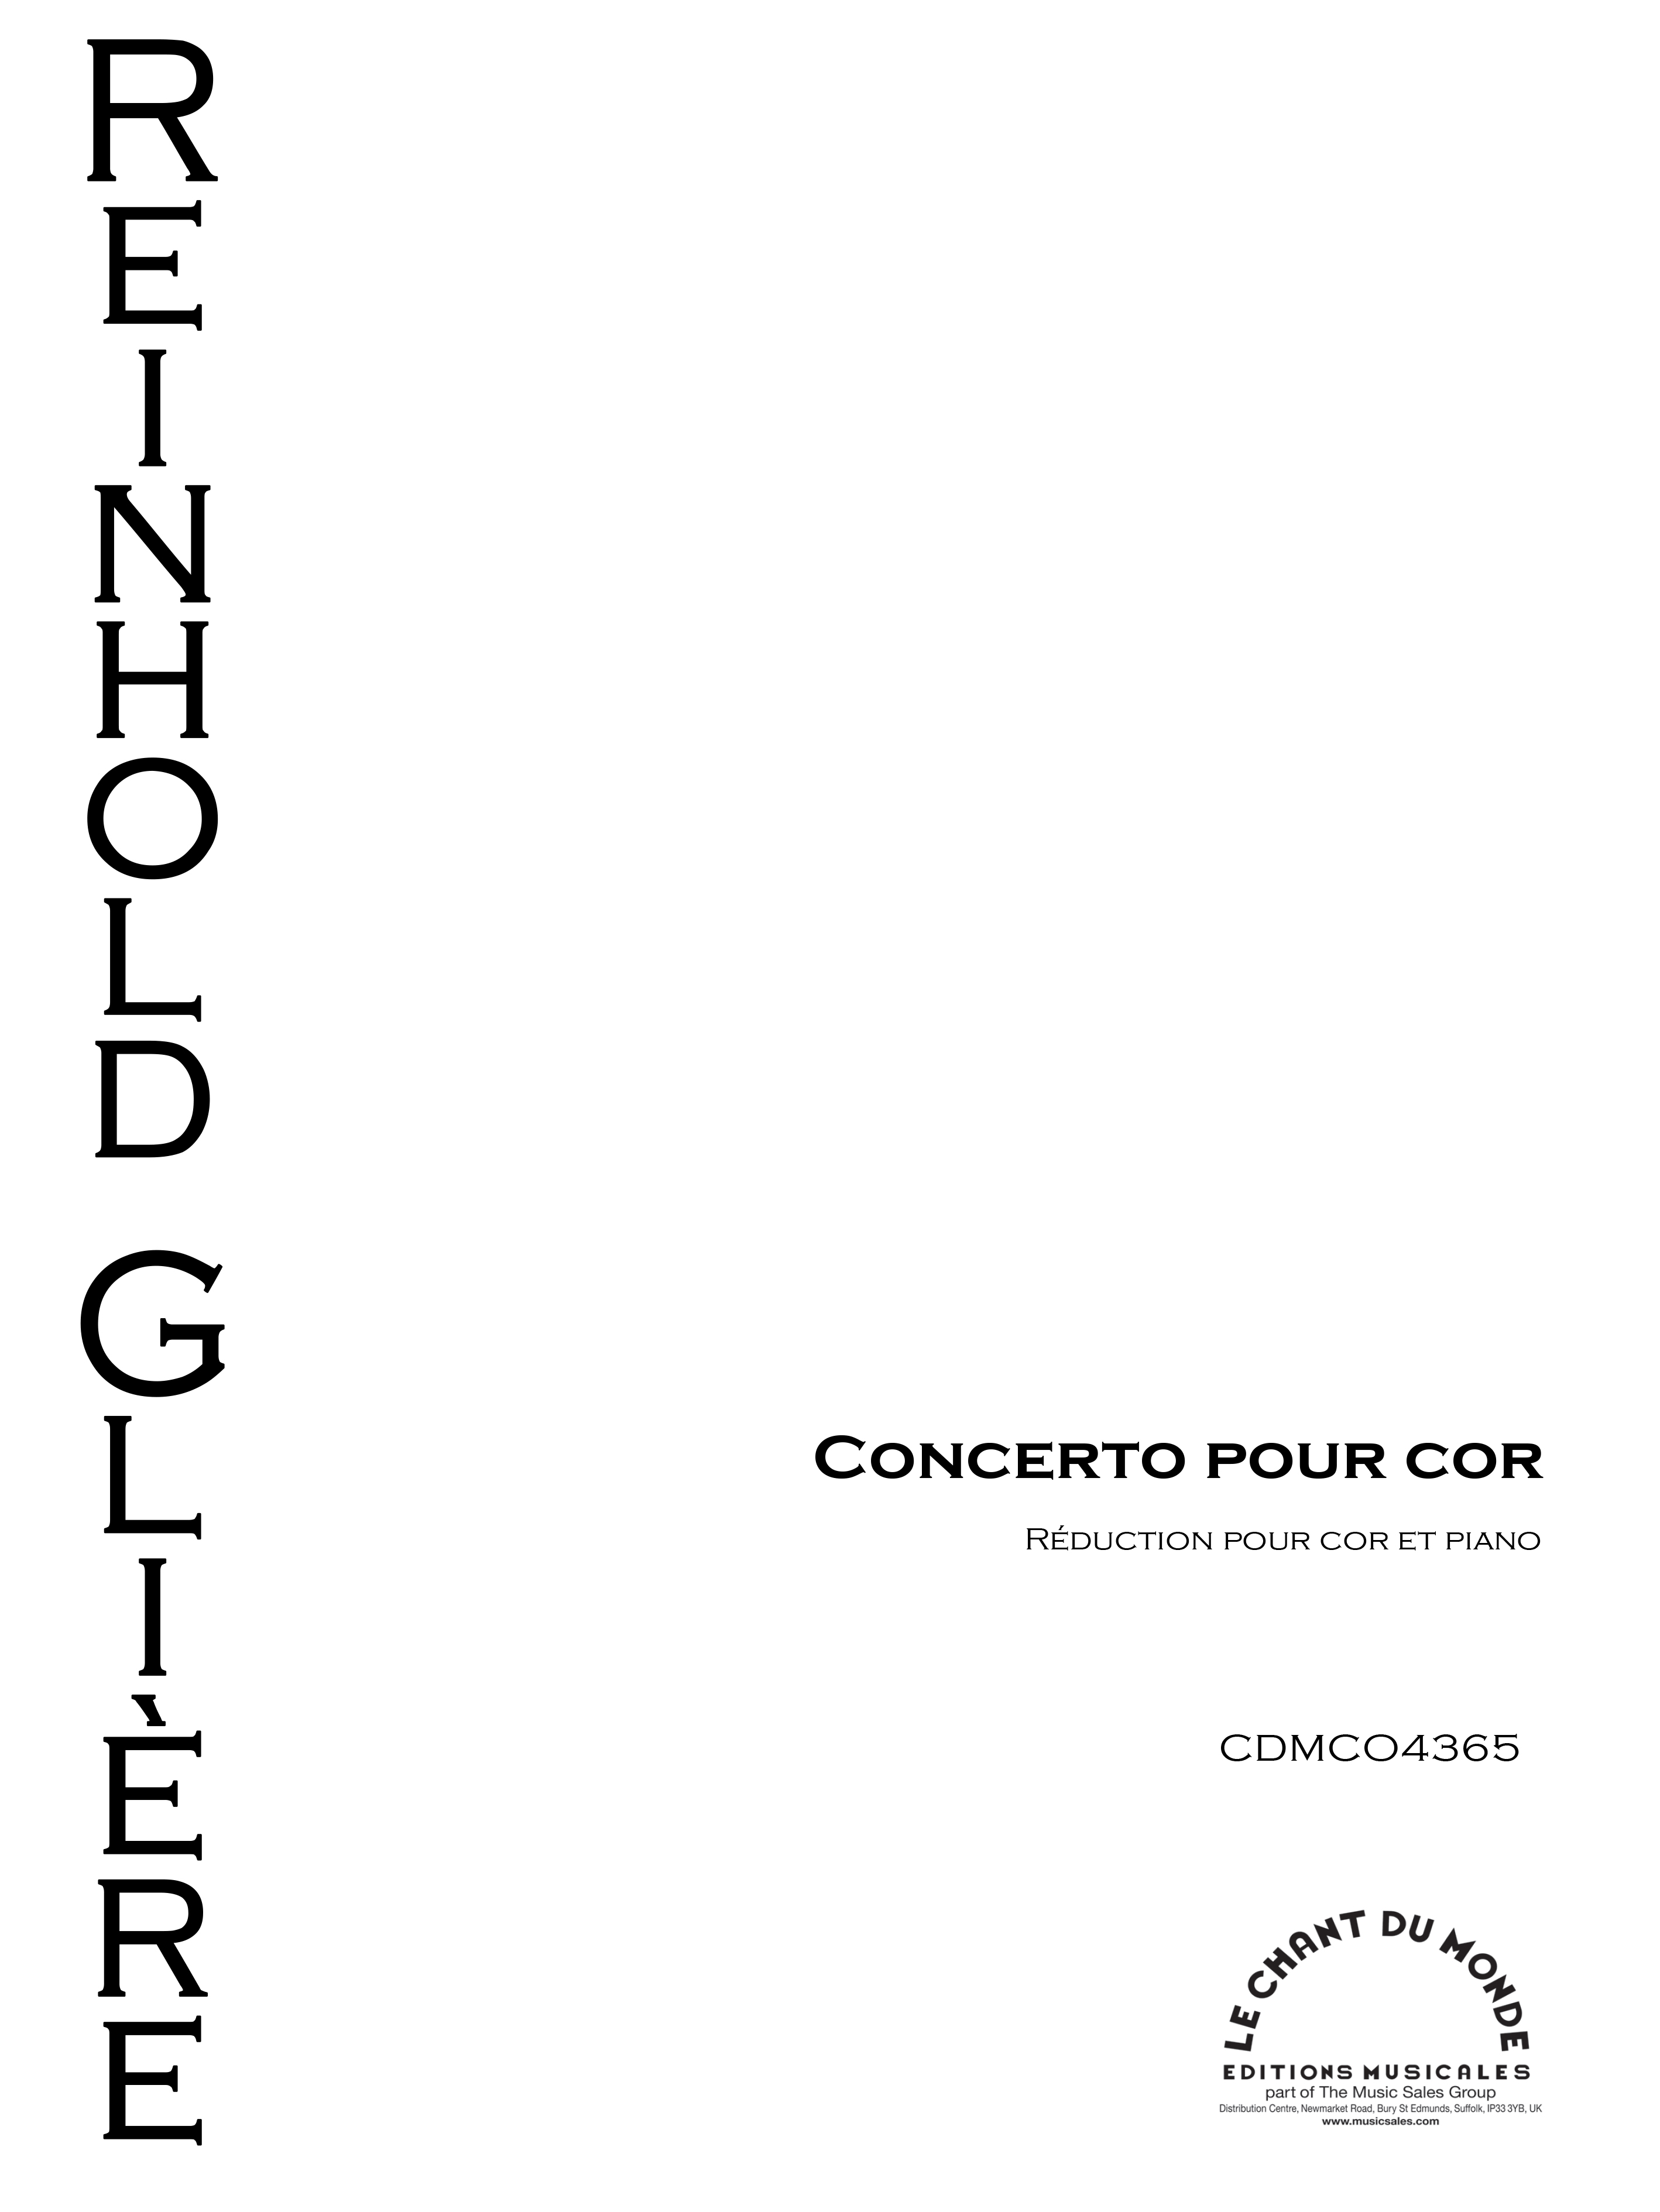 Reinhold Glire: Concerto Pour Cor Op. 91: French Horn: Instrumental Work